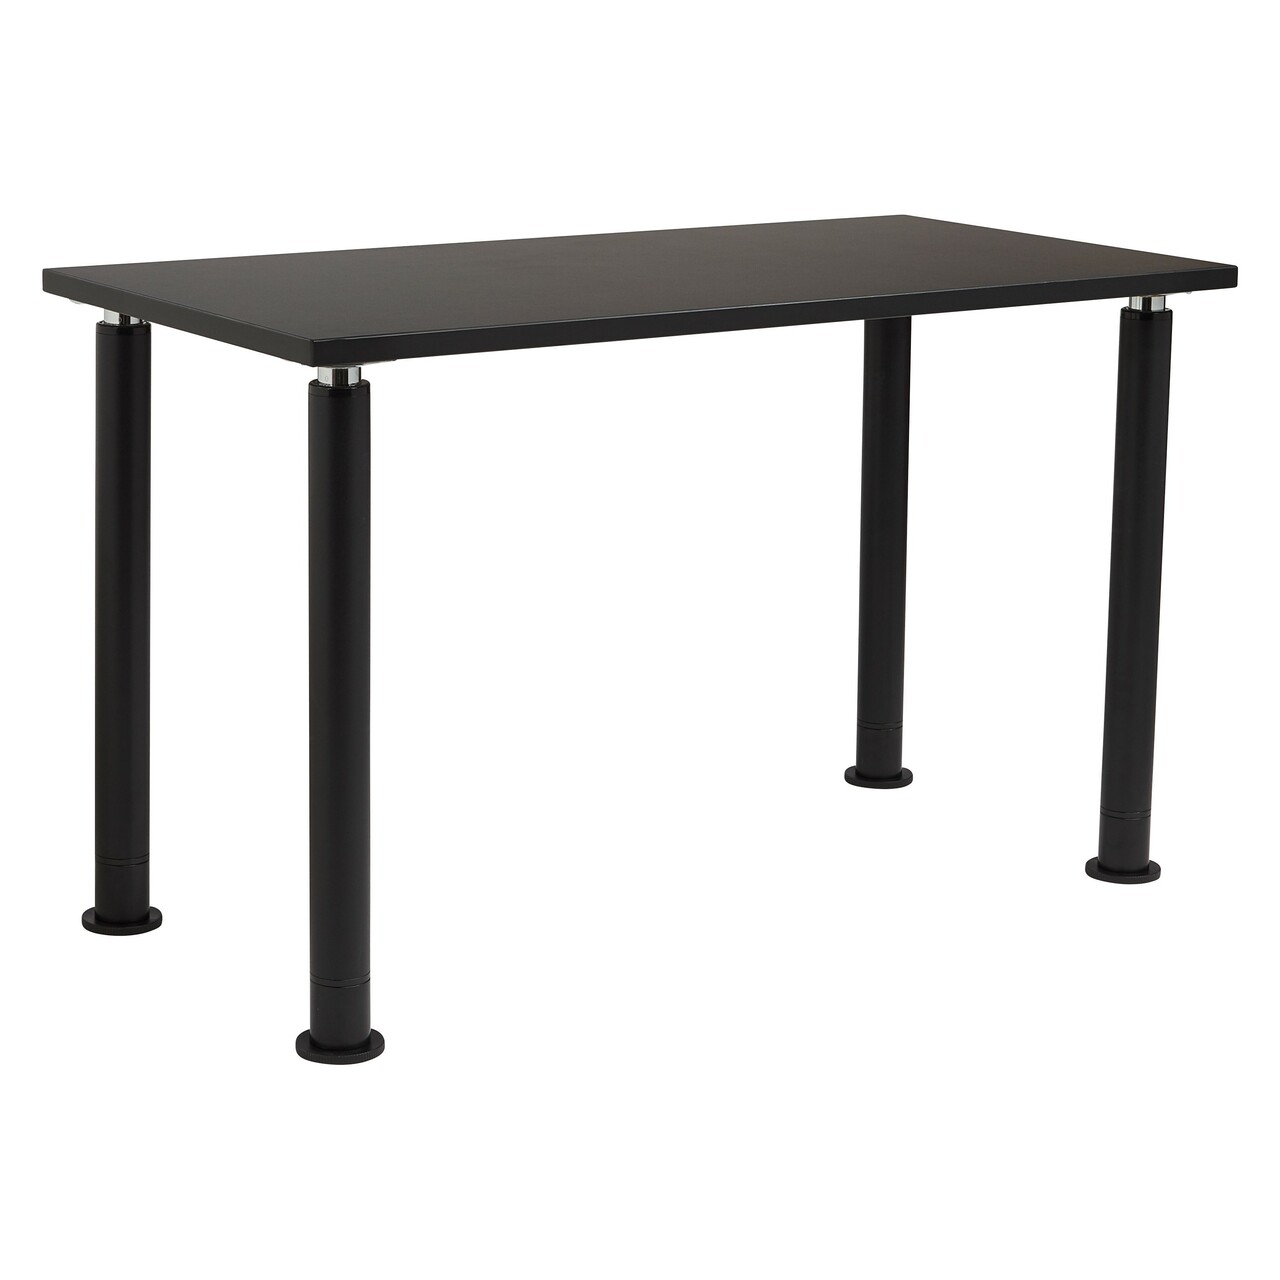 NPS Designer Science Table, 24"x60", Chemical Resistant Top - Black Top and Black Leg